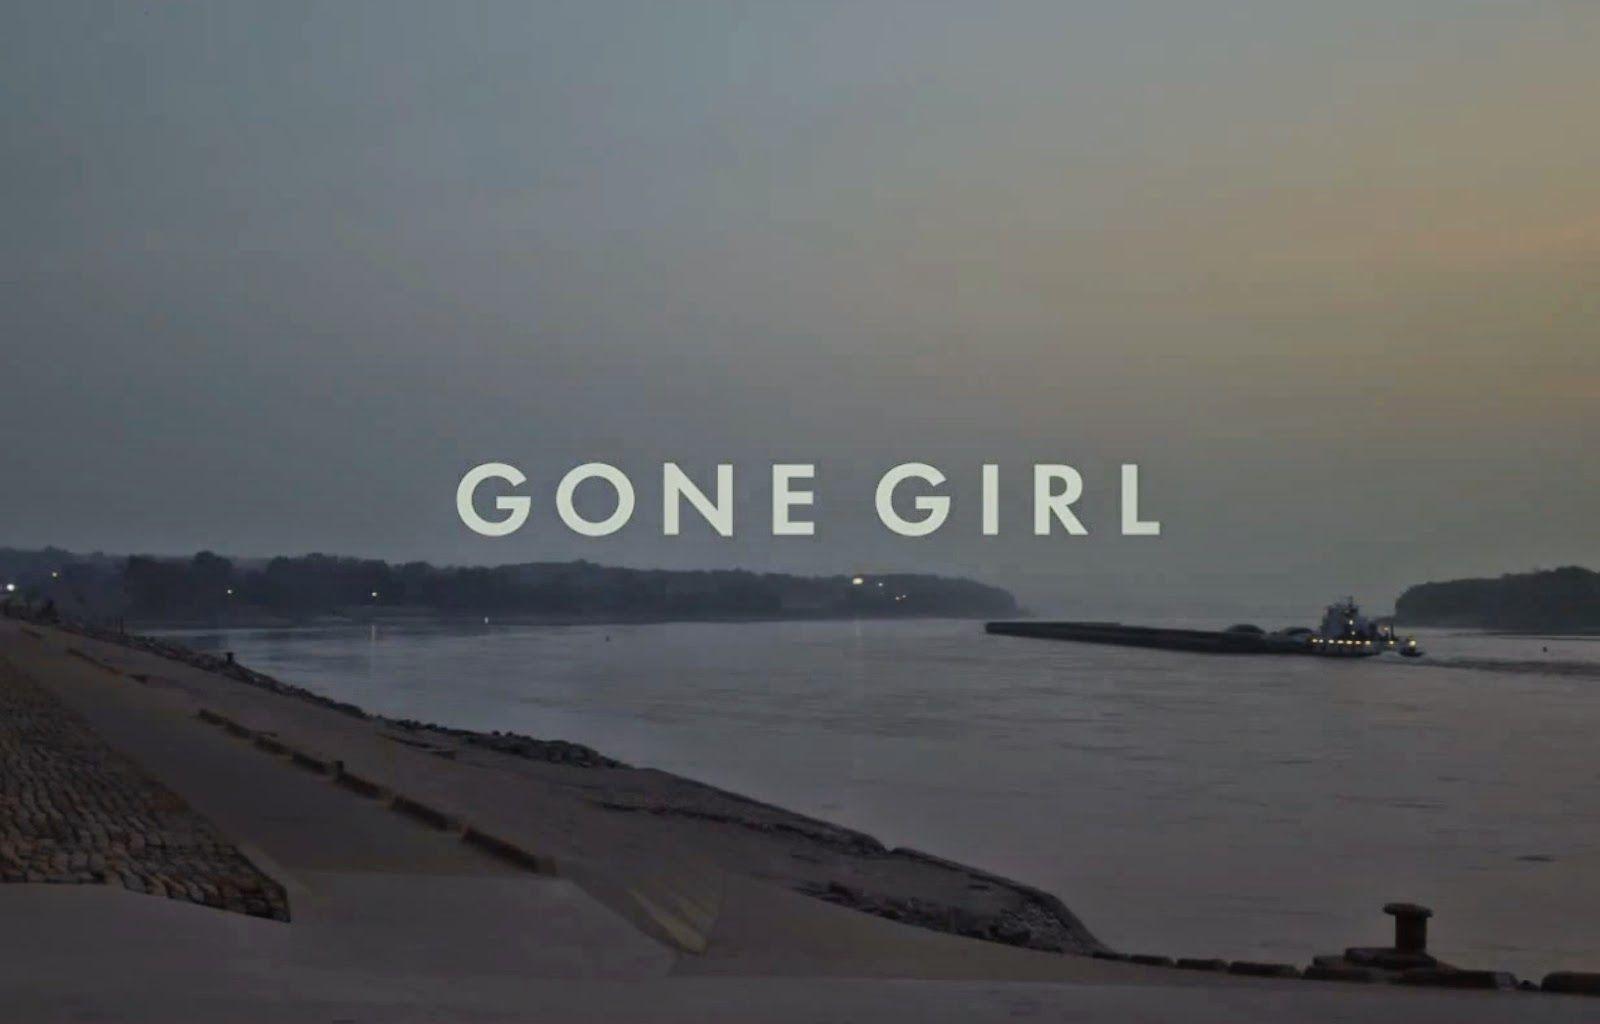 On Using #GoneGirl As An Excuse For Misogynistic “Fear”